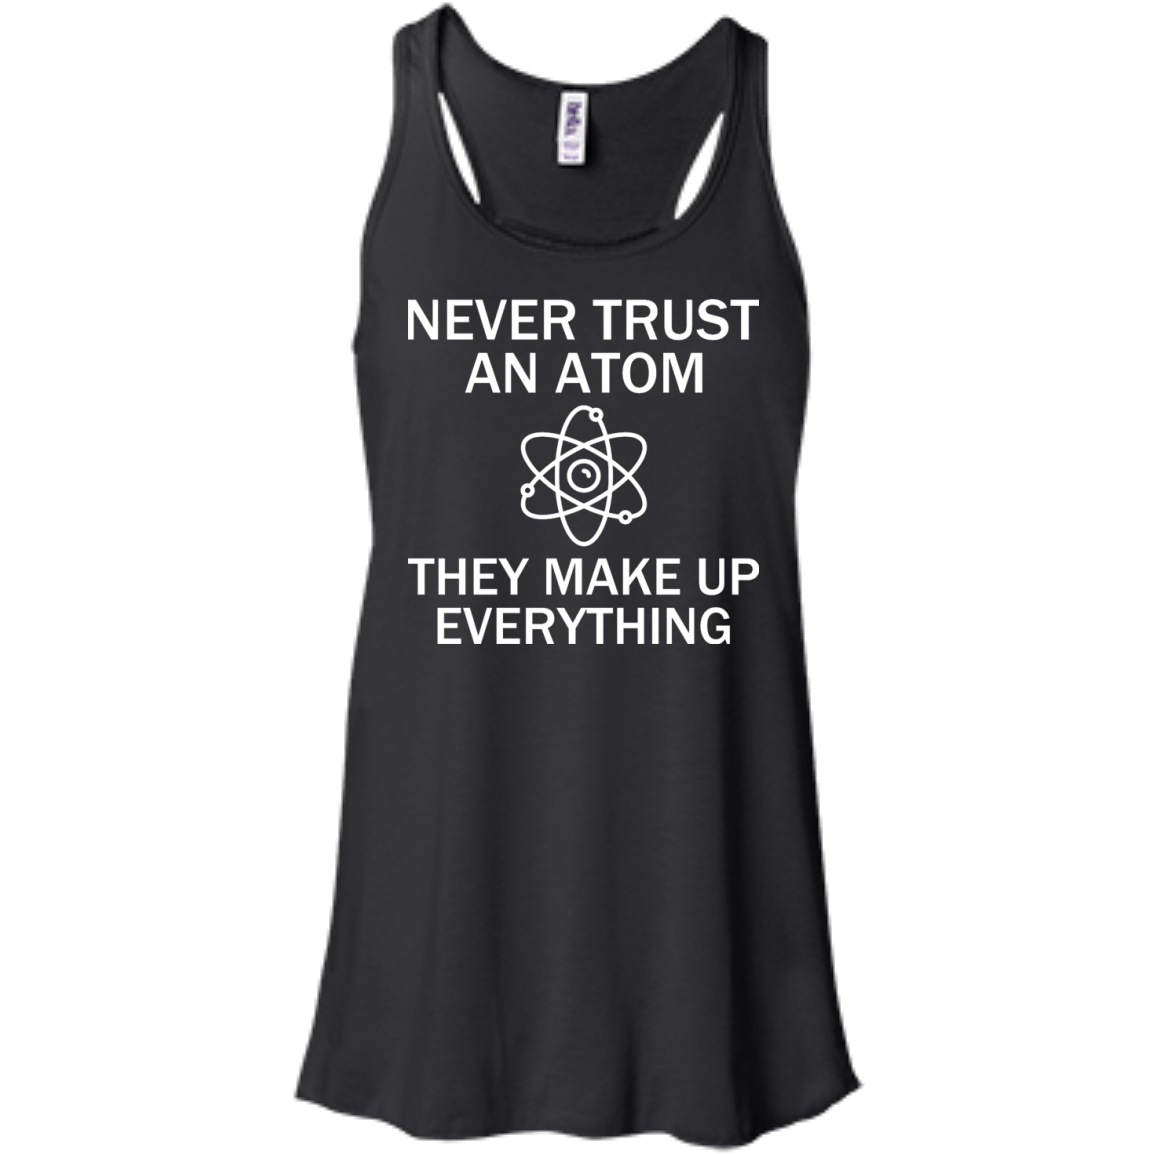 Never Trust An Atom - They Make Up Everything - Engineering Outfitters